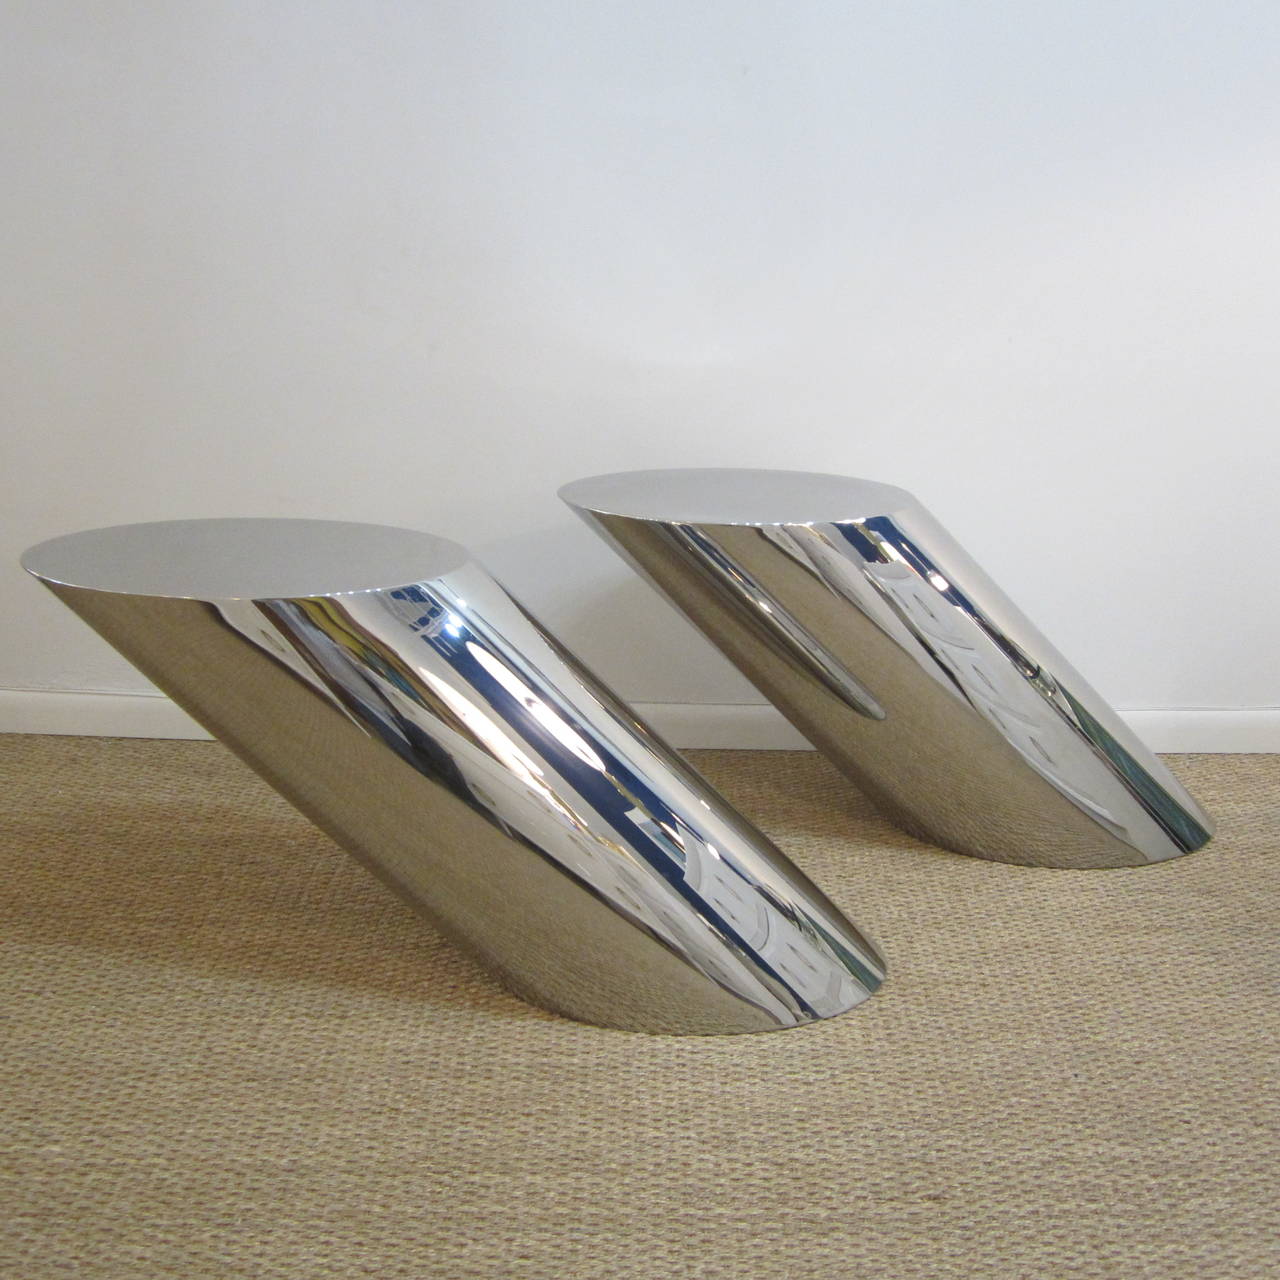 Fantastic polished stainless steel tables with counter balance weighted bottoms providing the cantilevered design. They show minimal signs of ware notably on the tops but in no way compromises their beauty and structural soundness.
Can be sold